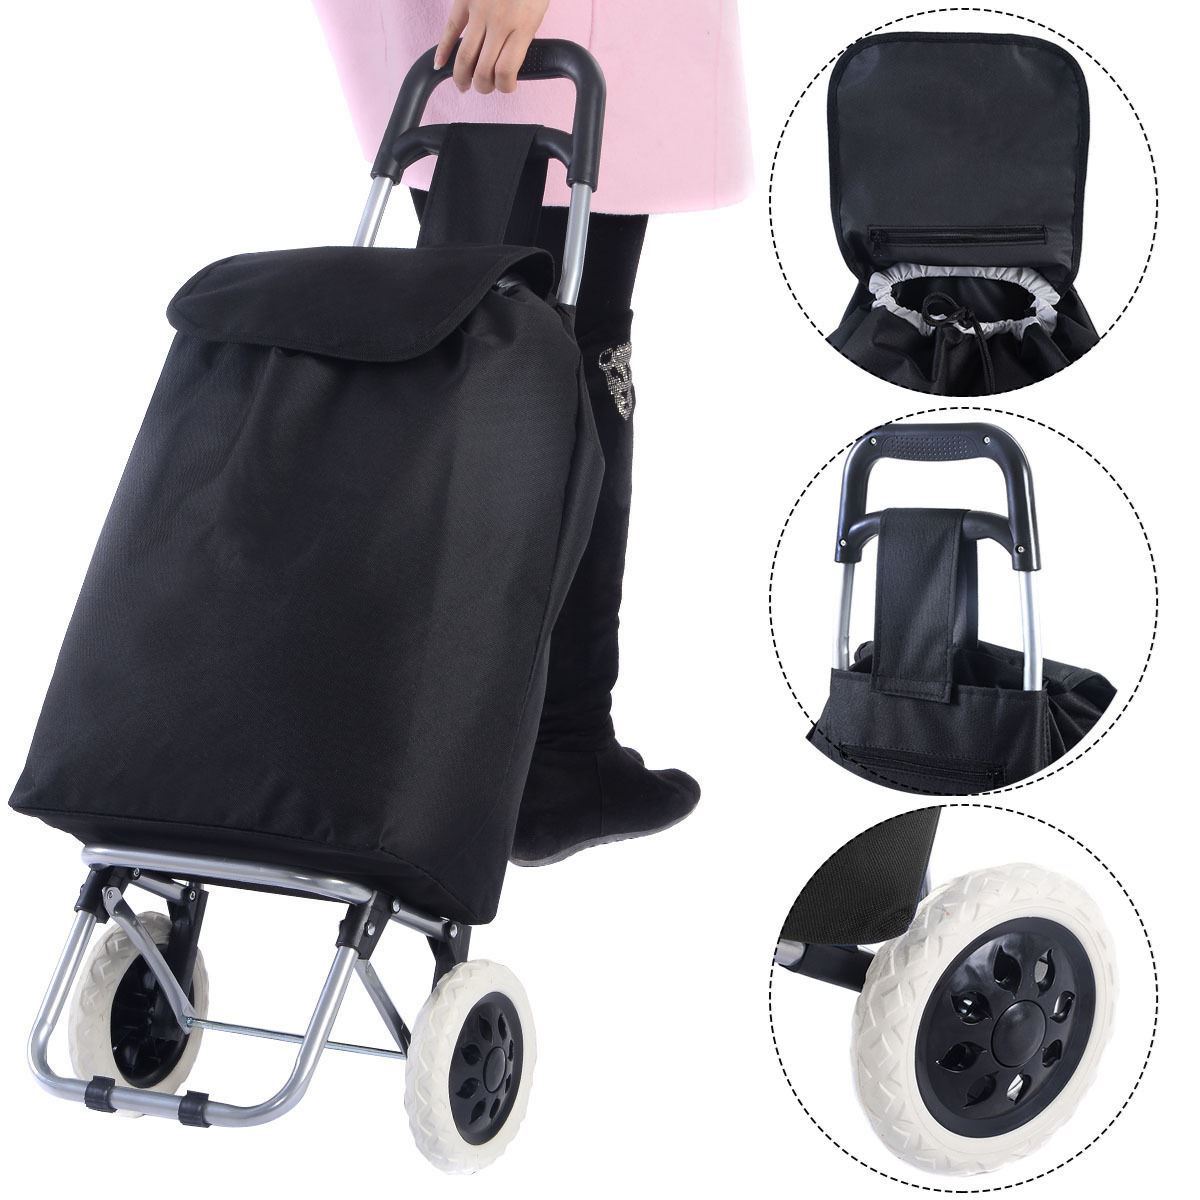 Online Gym Shop Cb16954 7 X 13 X 31 In. Wheeled Shopping Trolley Push Cart Bag Large Capacity Light Weight, Black